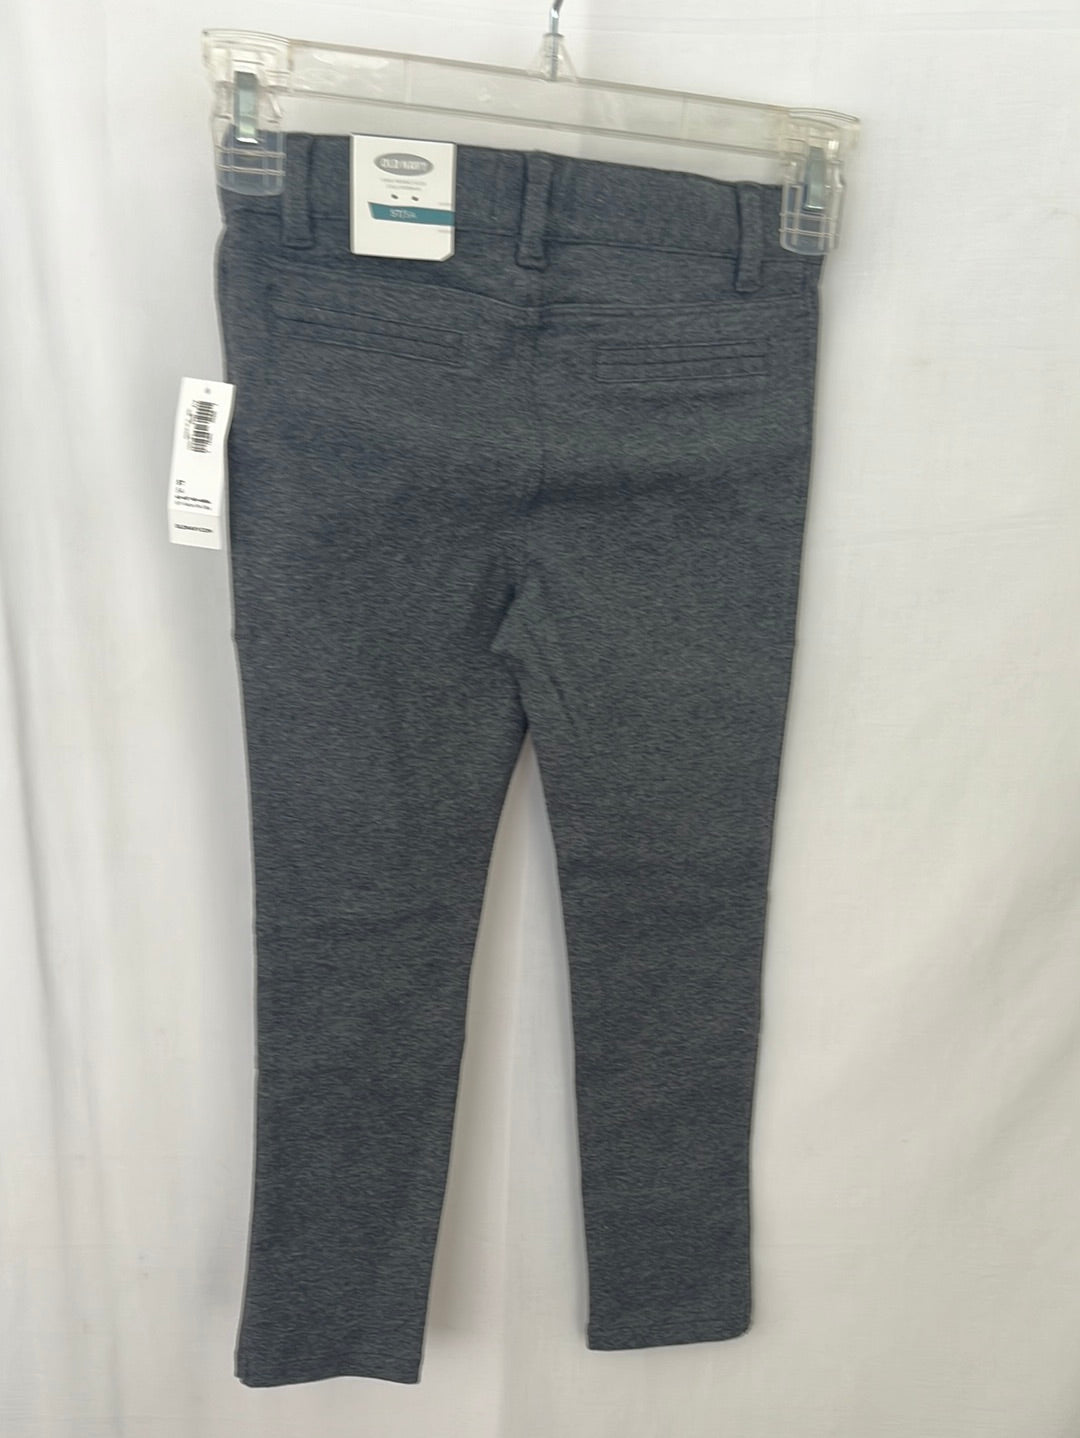 NWT -- OLD NAVY Kid's Grey Adjustable Waist Ponte-Knit Jeggings -- 5T/5A